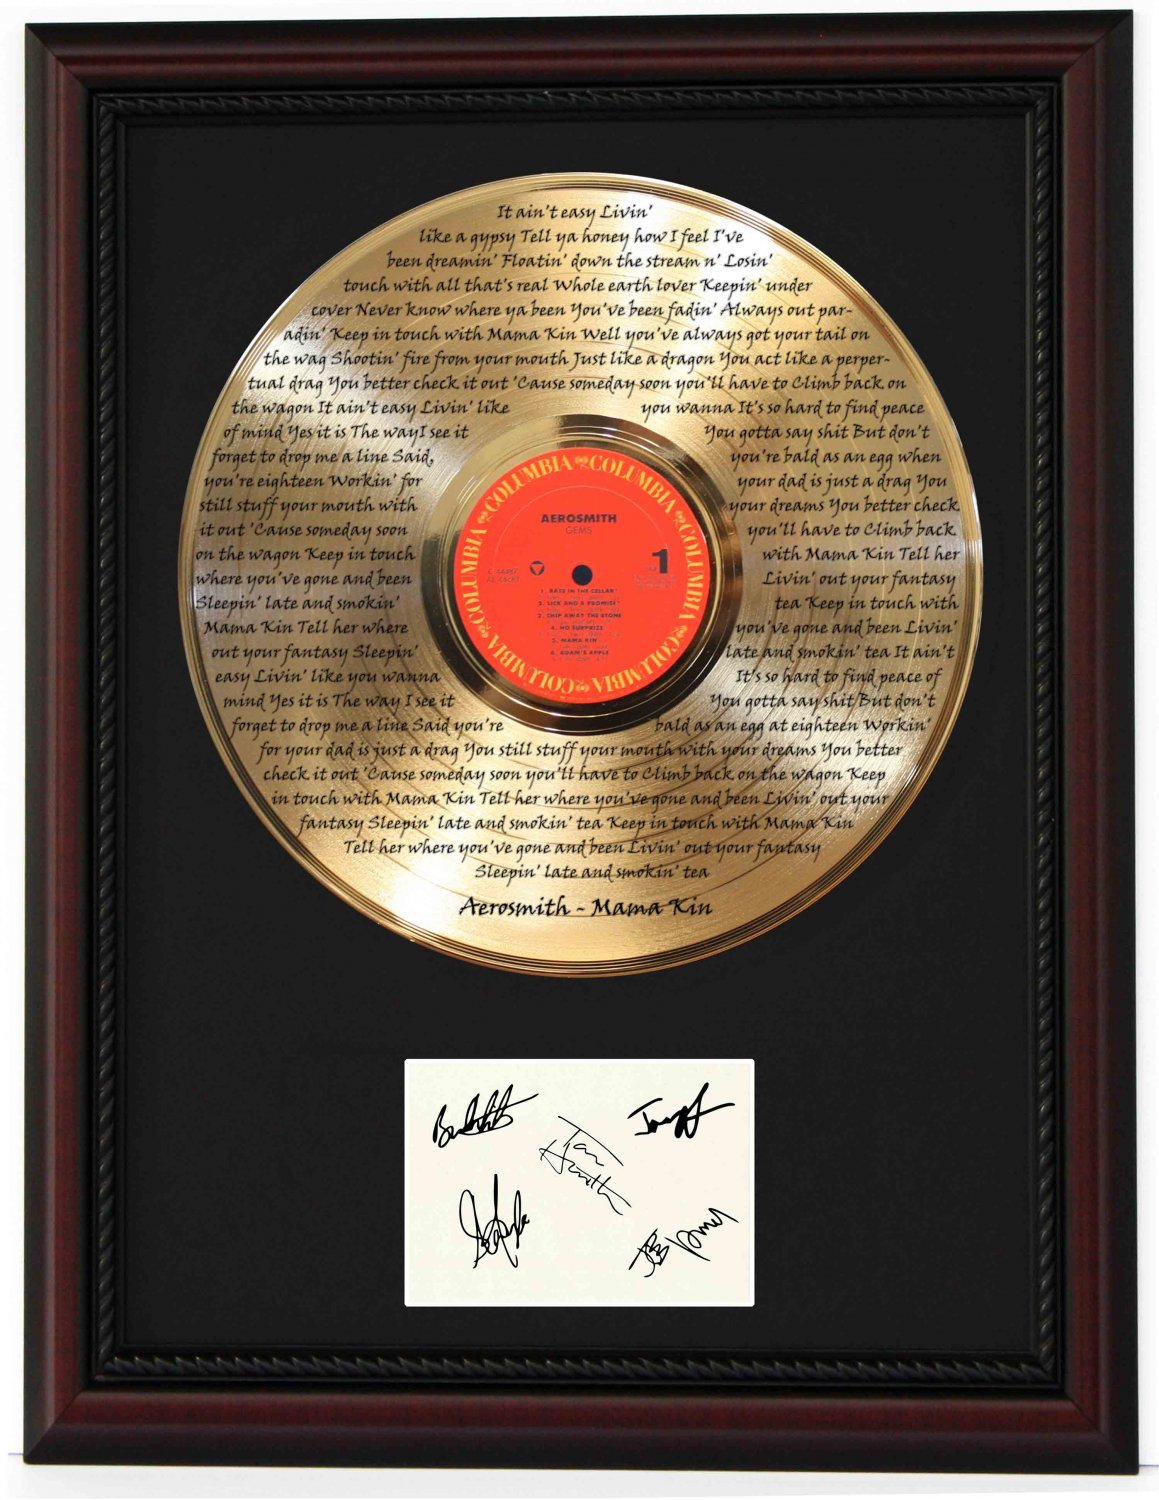 AEROSMITH "Mama Kin" Cherry Wood Gold LP Record Framed Etched Signature Display